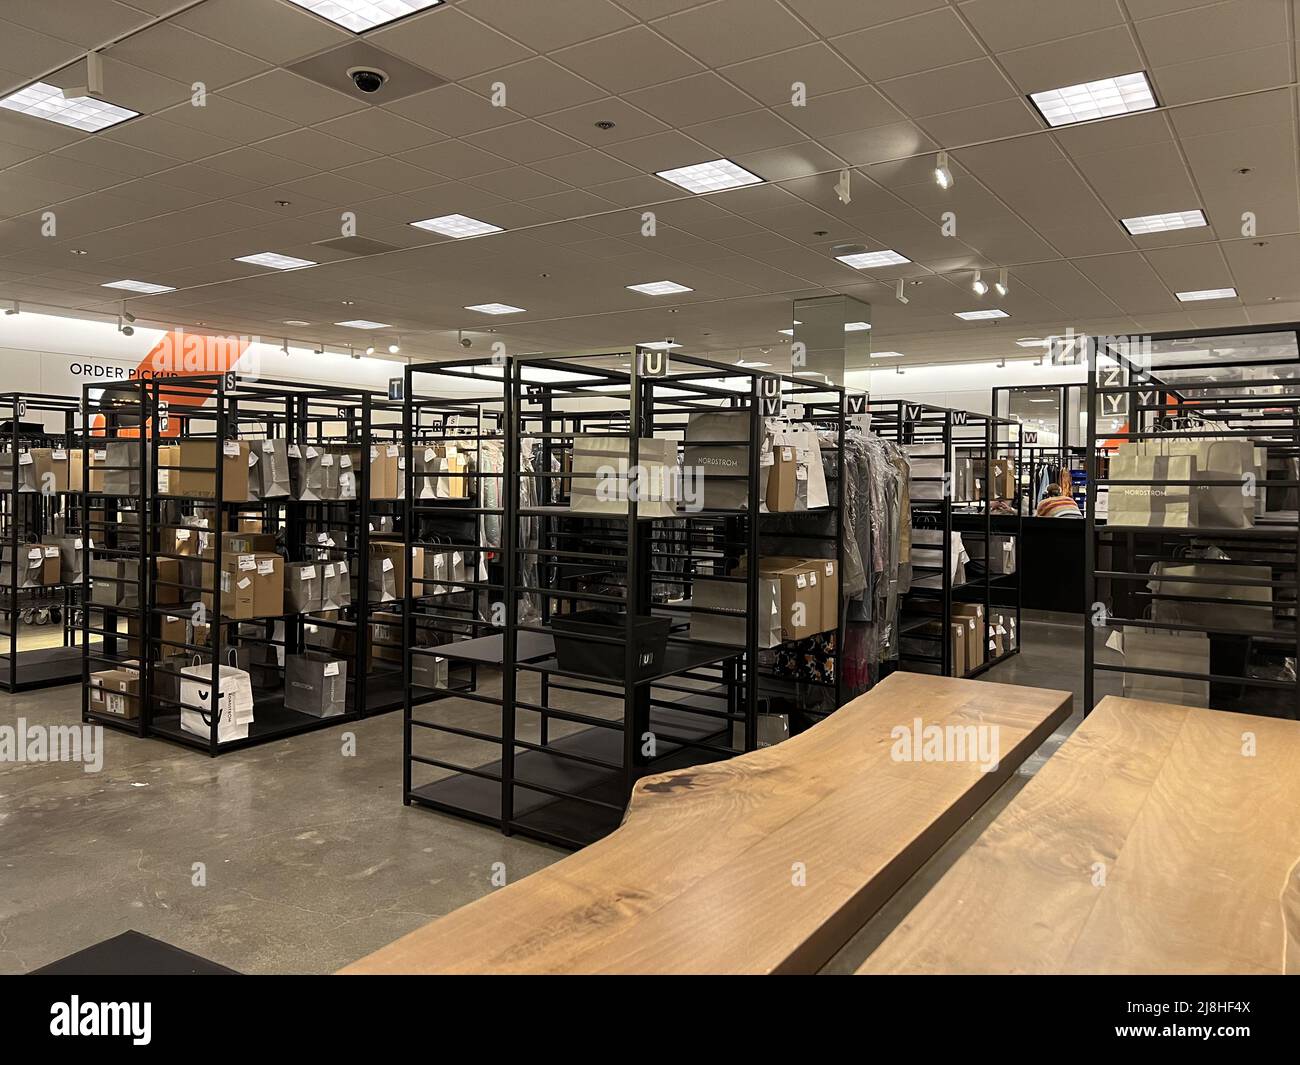 Walnut creek nordstrom hi-res stock photography and images - Alamy